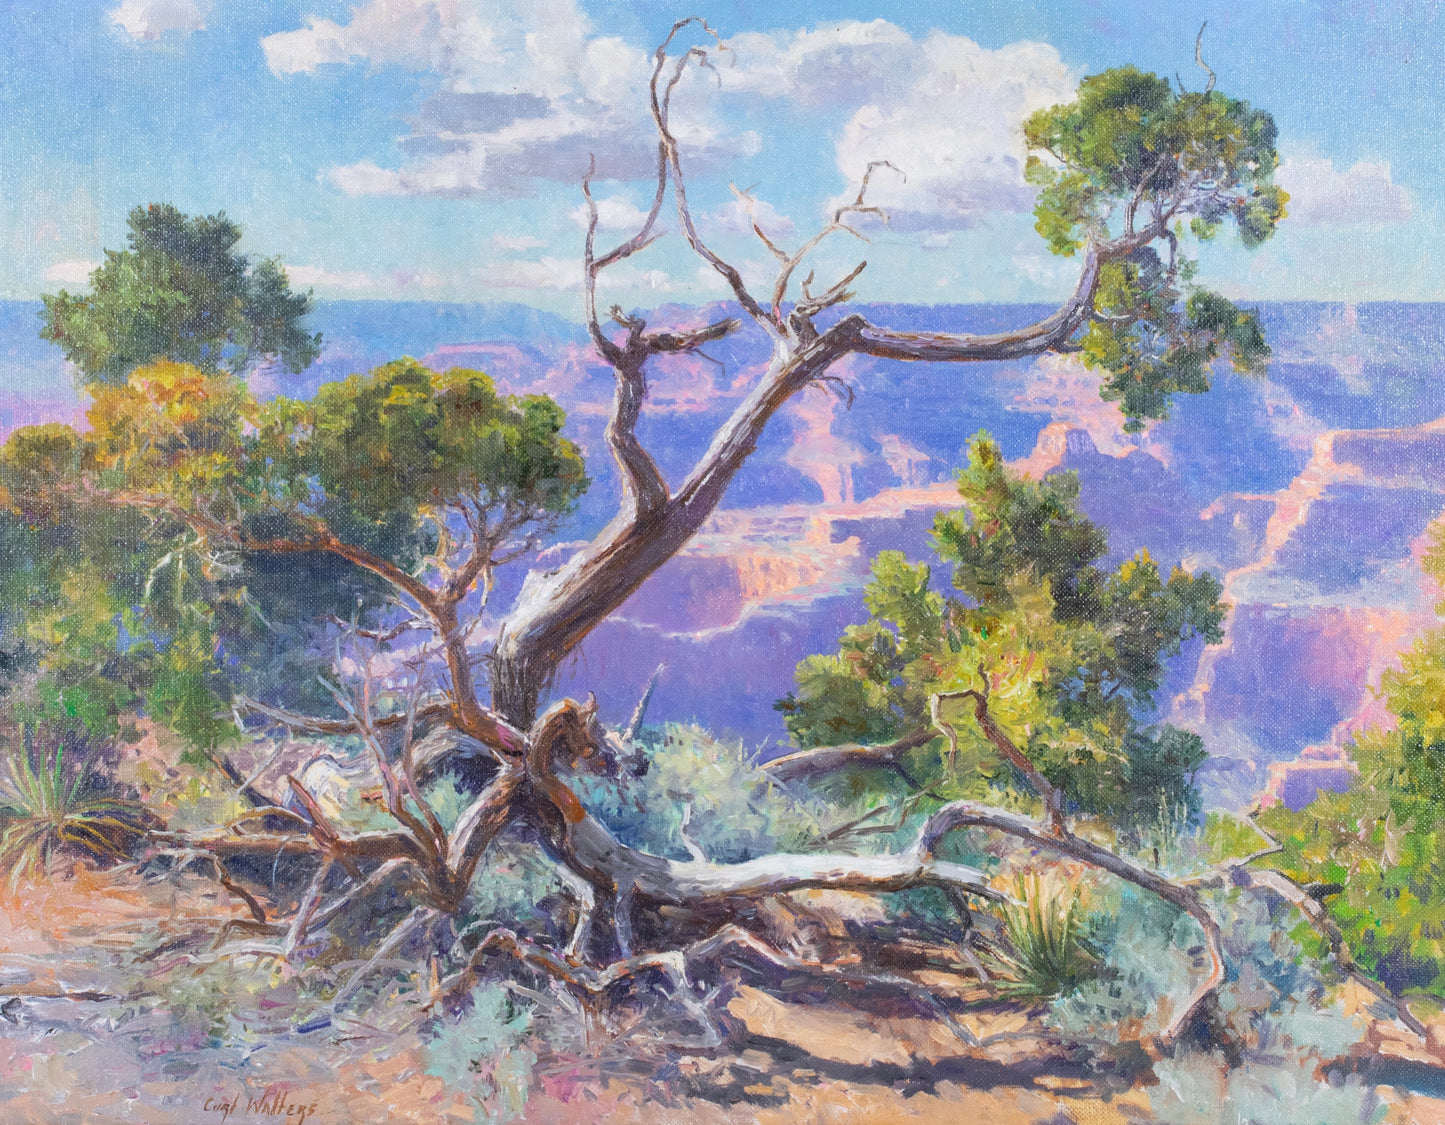 Curt Walters - Tree in a Canyon (Grand Canyon) 27" x 35"